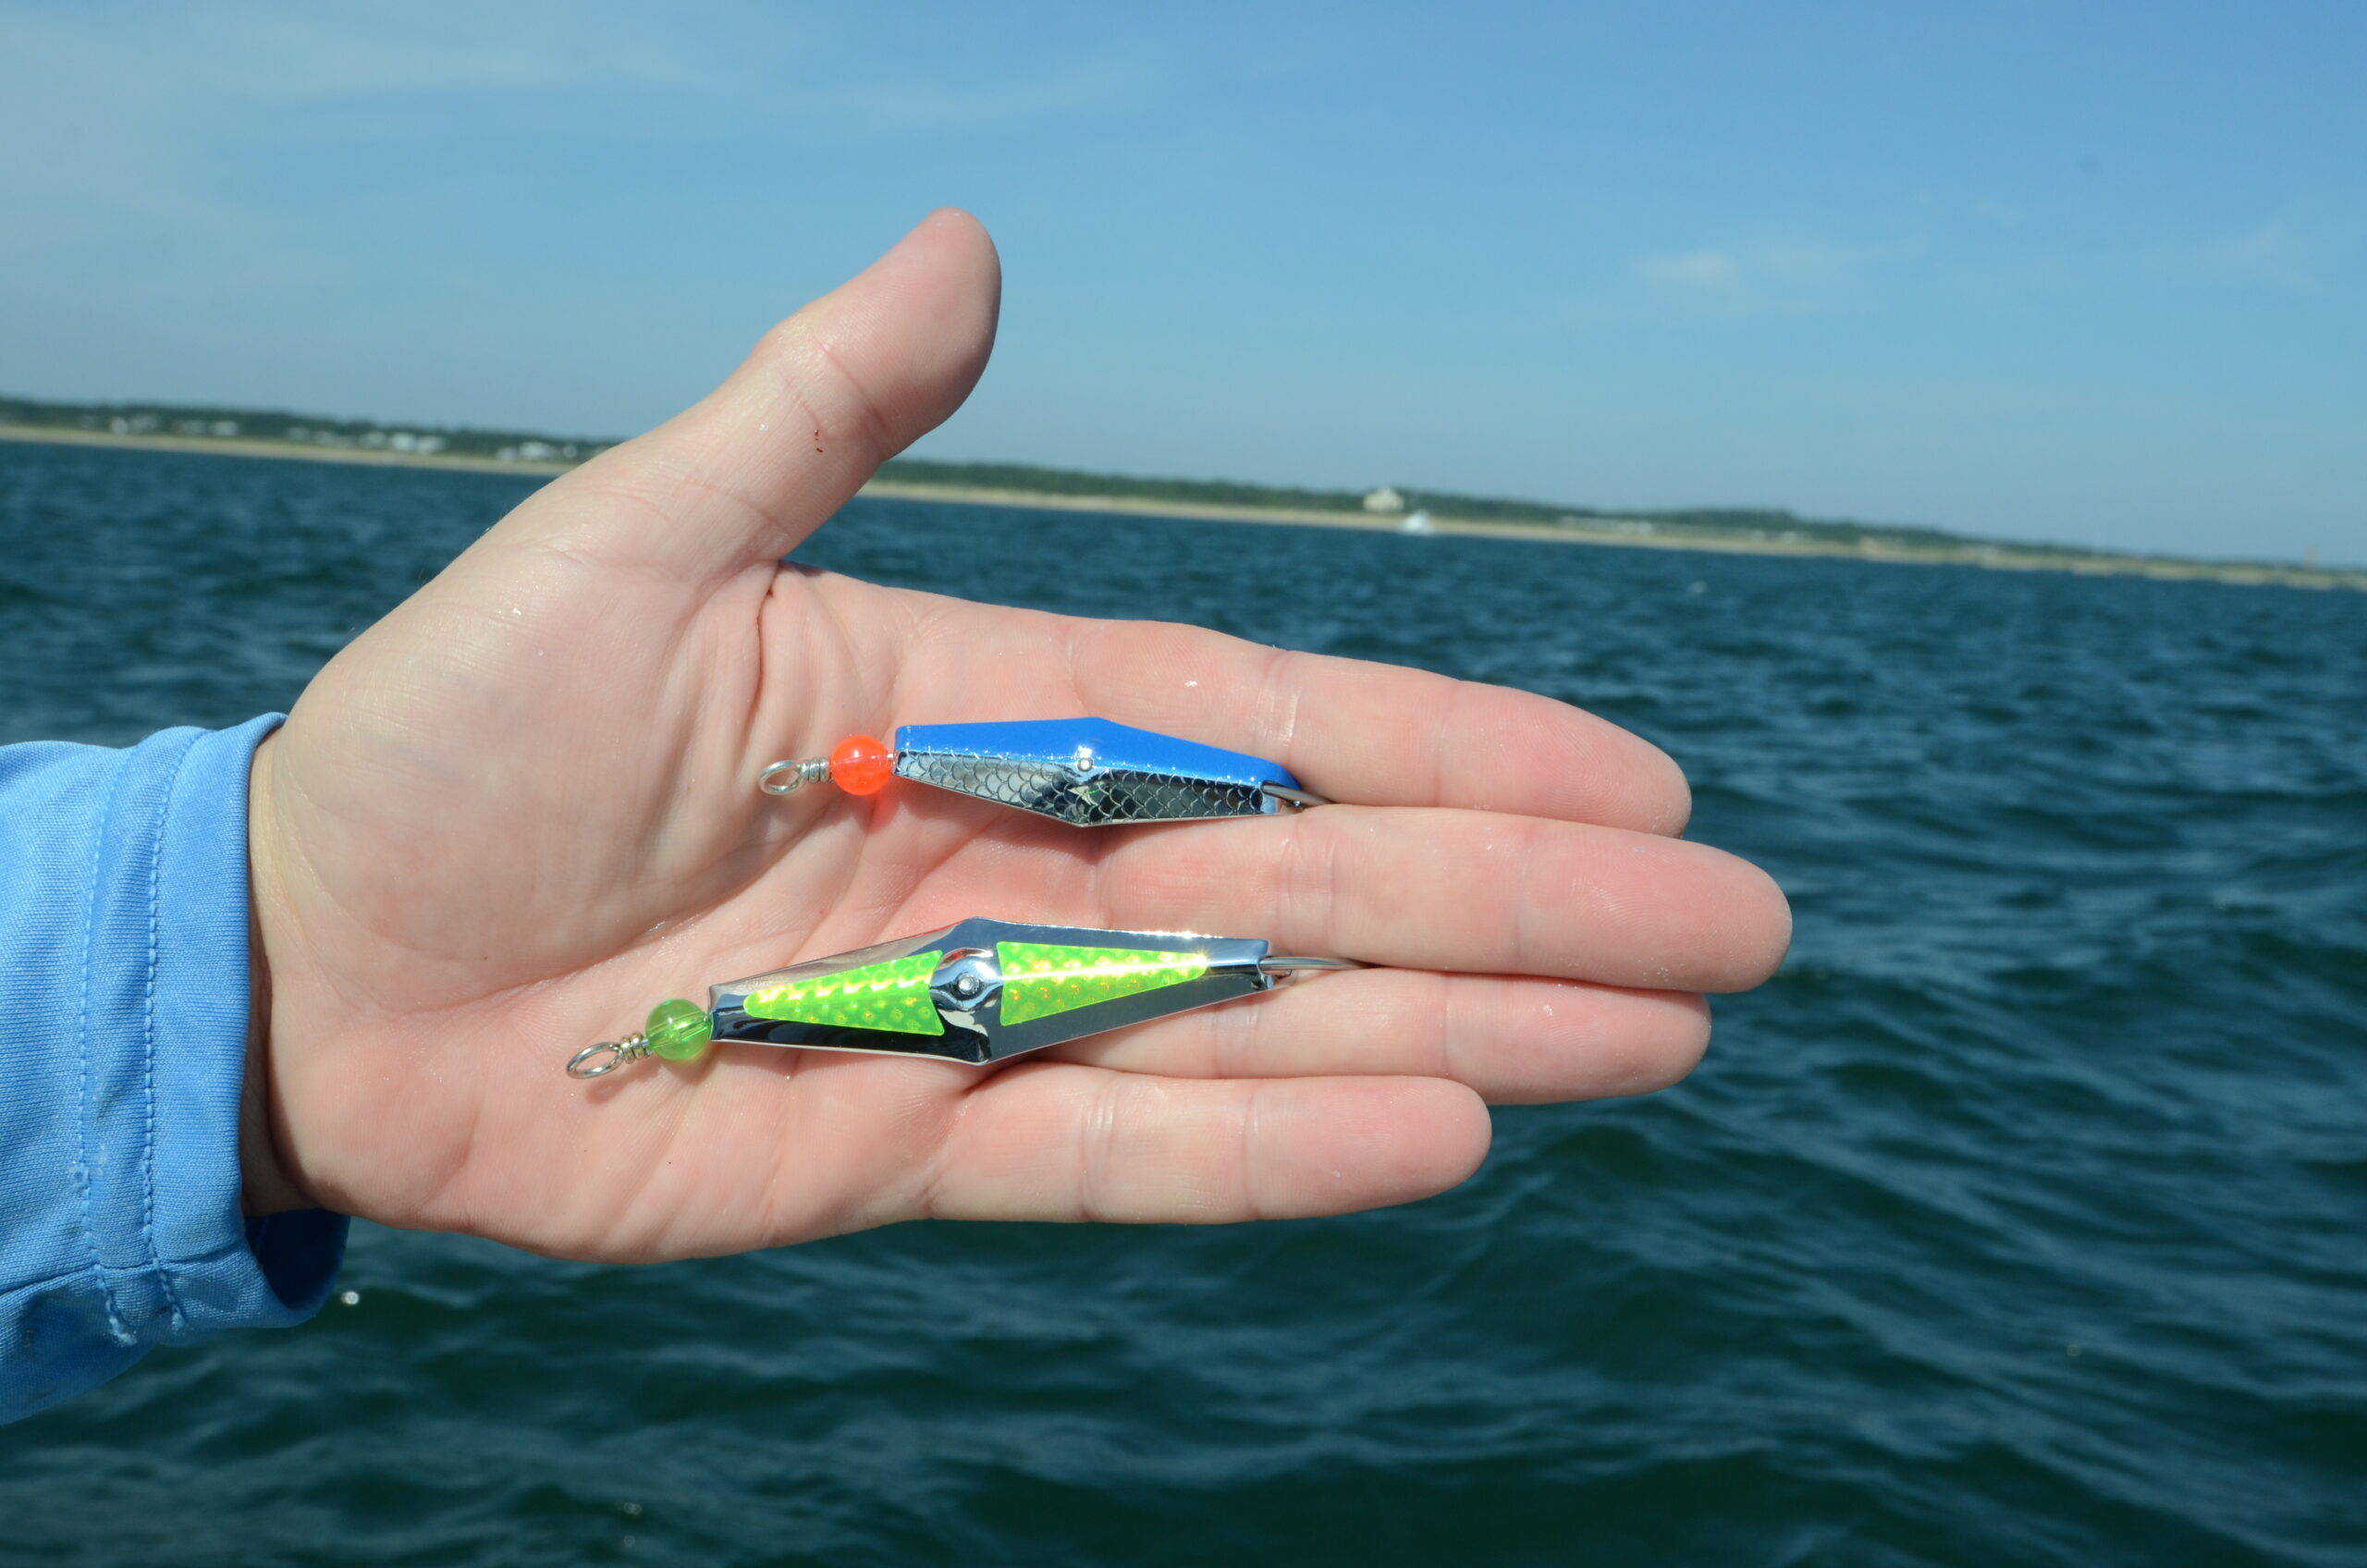 The Clark Spoon is the best trolling lure for spanish mackerel